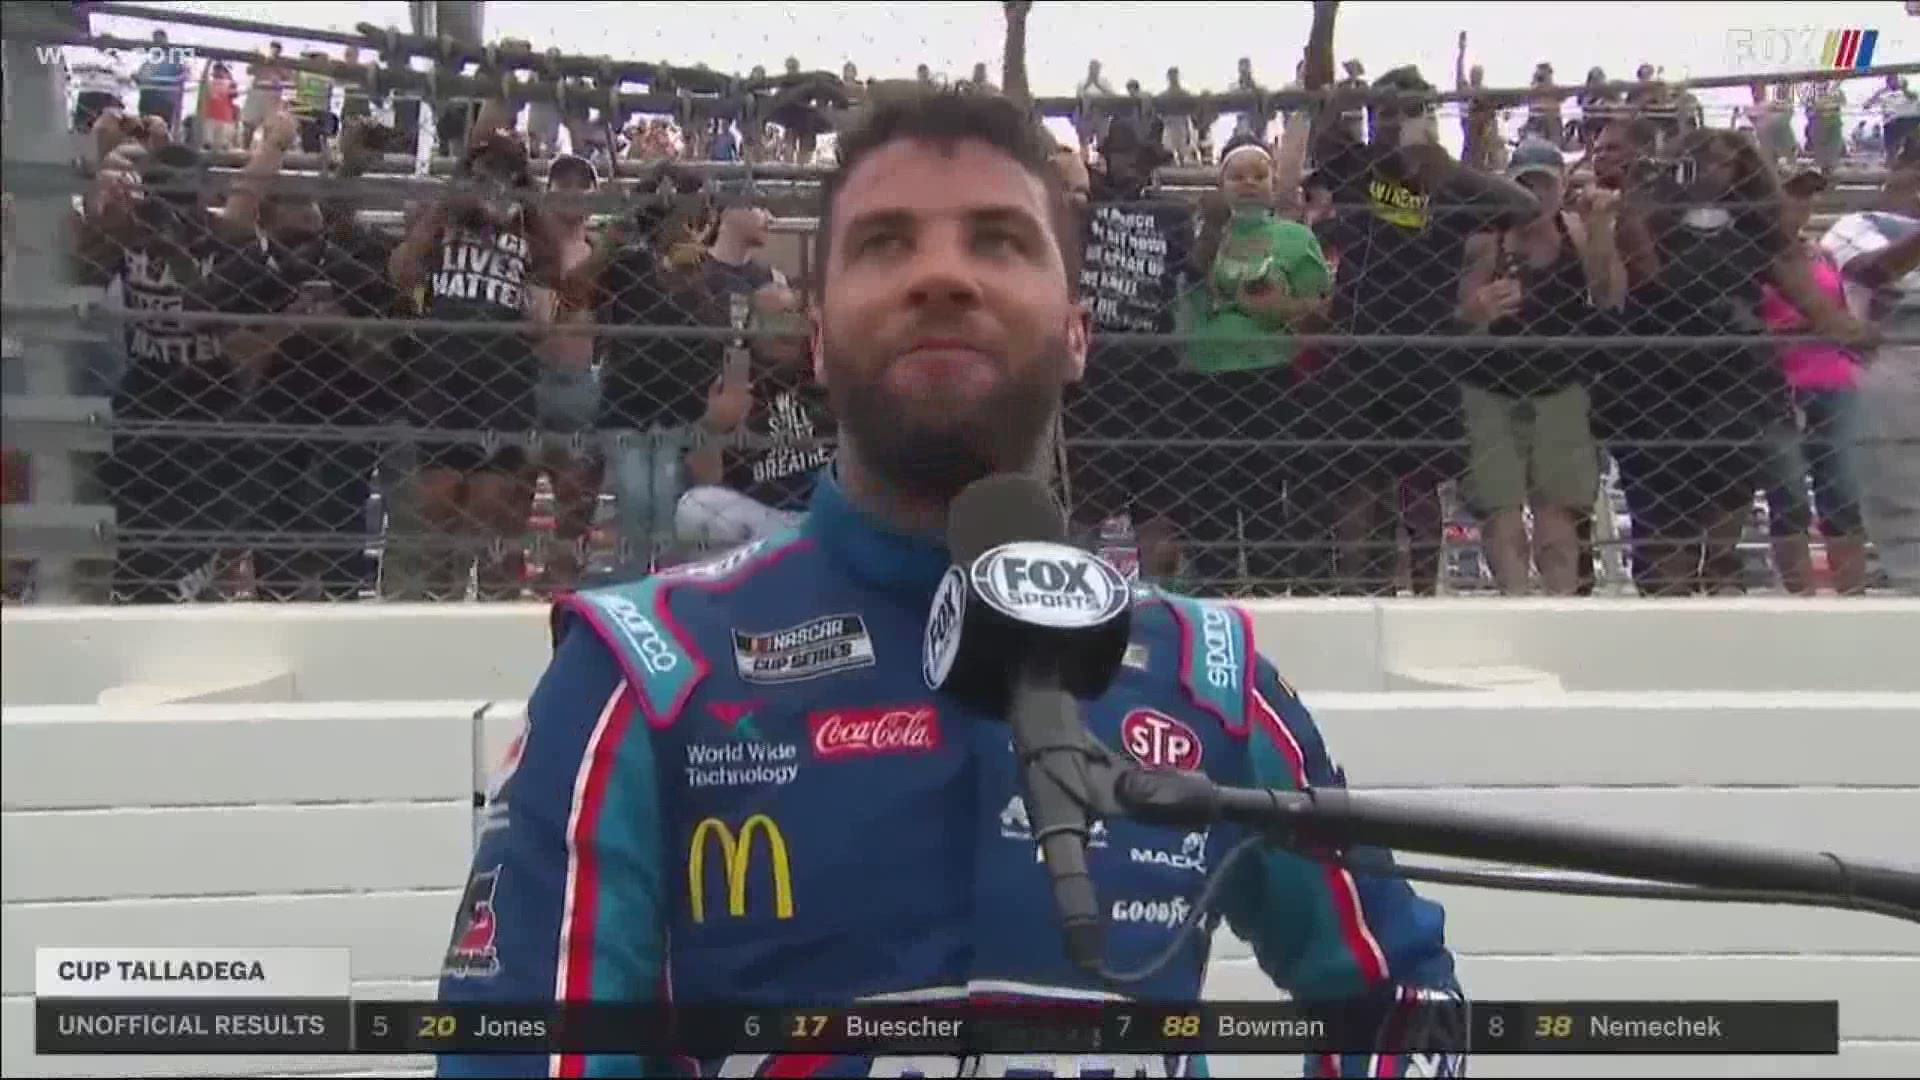 Wallace said after the race, "you're not going to take away my smile, I'm going to keep on going."